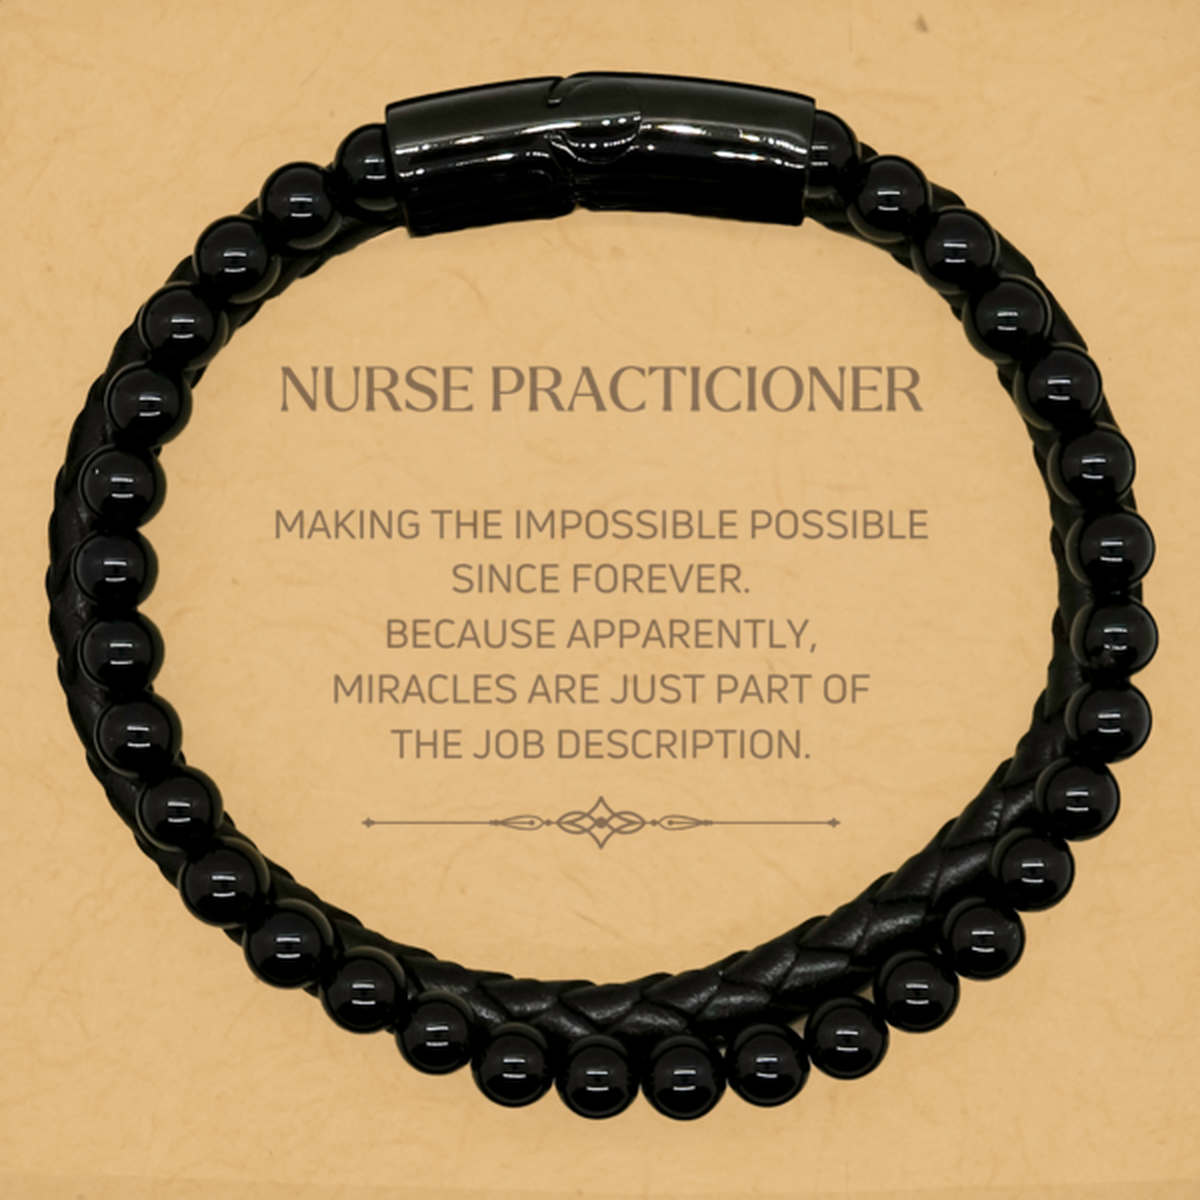 Funny Nurse Practicioner Gifts, Miracles are just part of the job description, Inspirational Birthday Stone Leather Bracelets For Nurse Practicioner, Men, Women, Coworkers, Friends, Boss